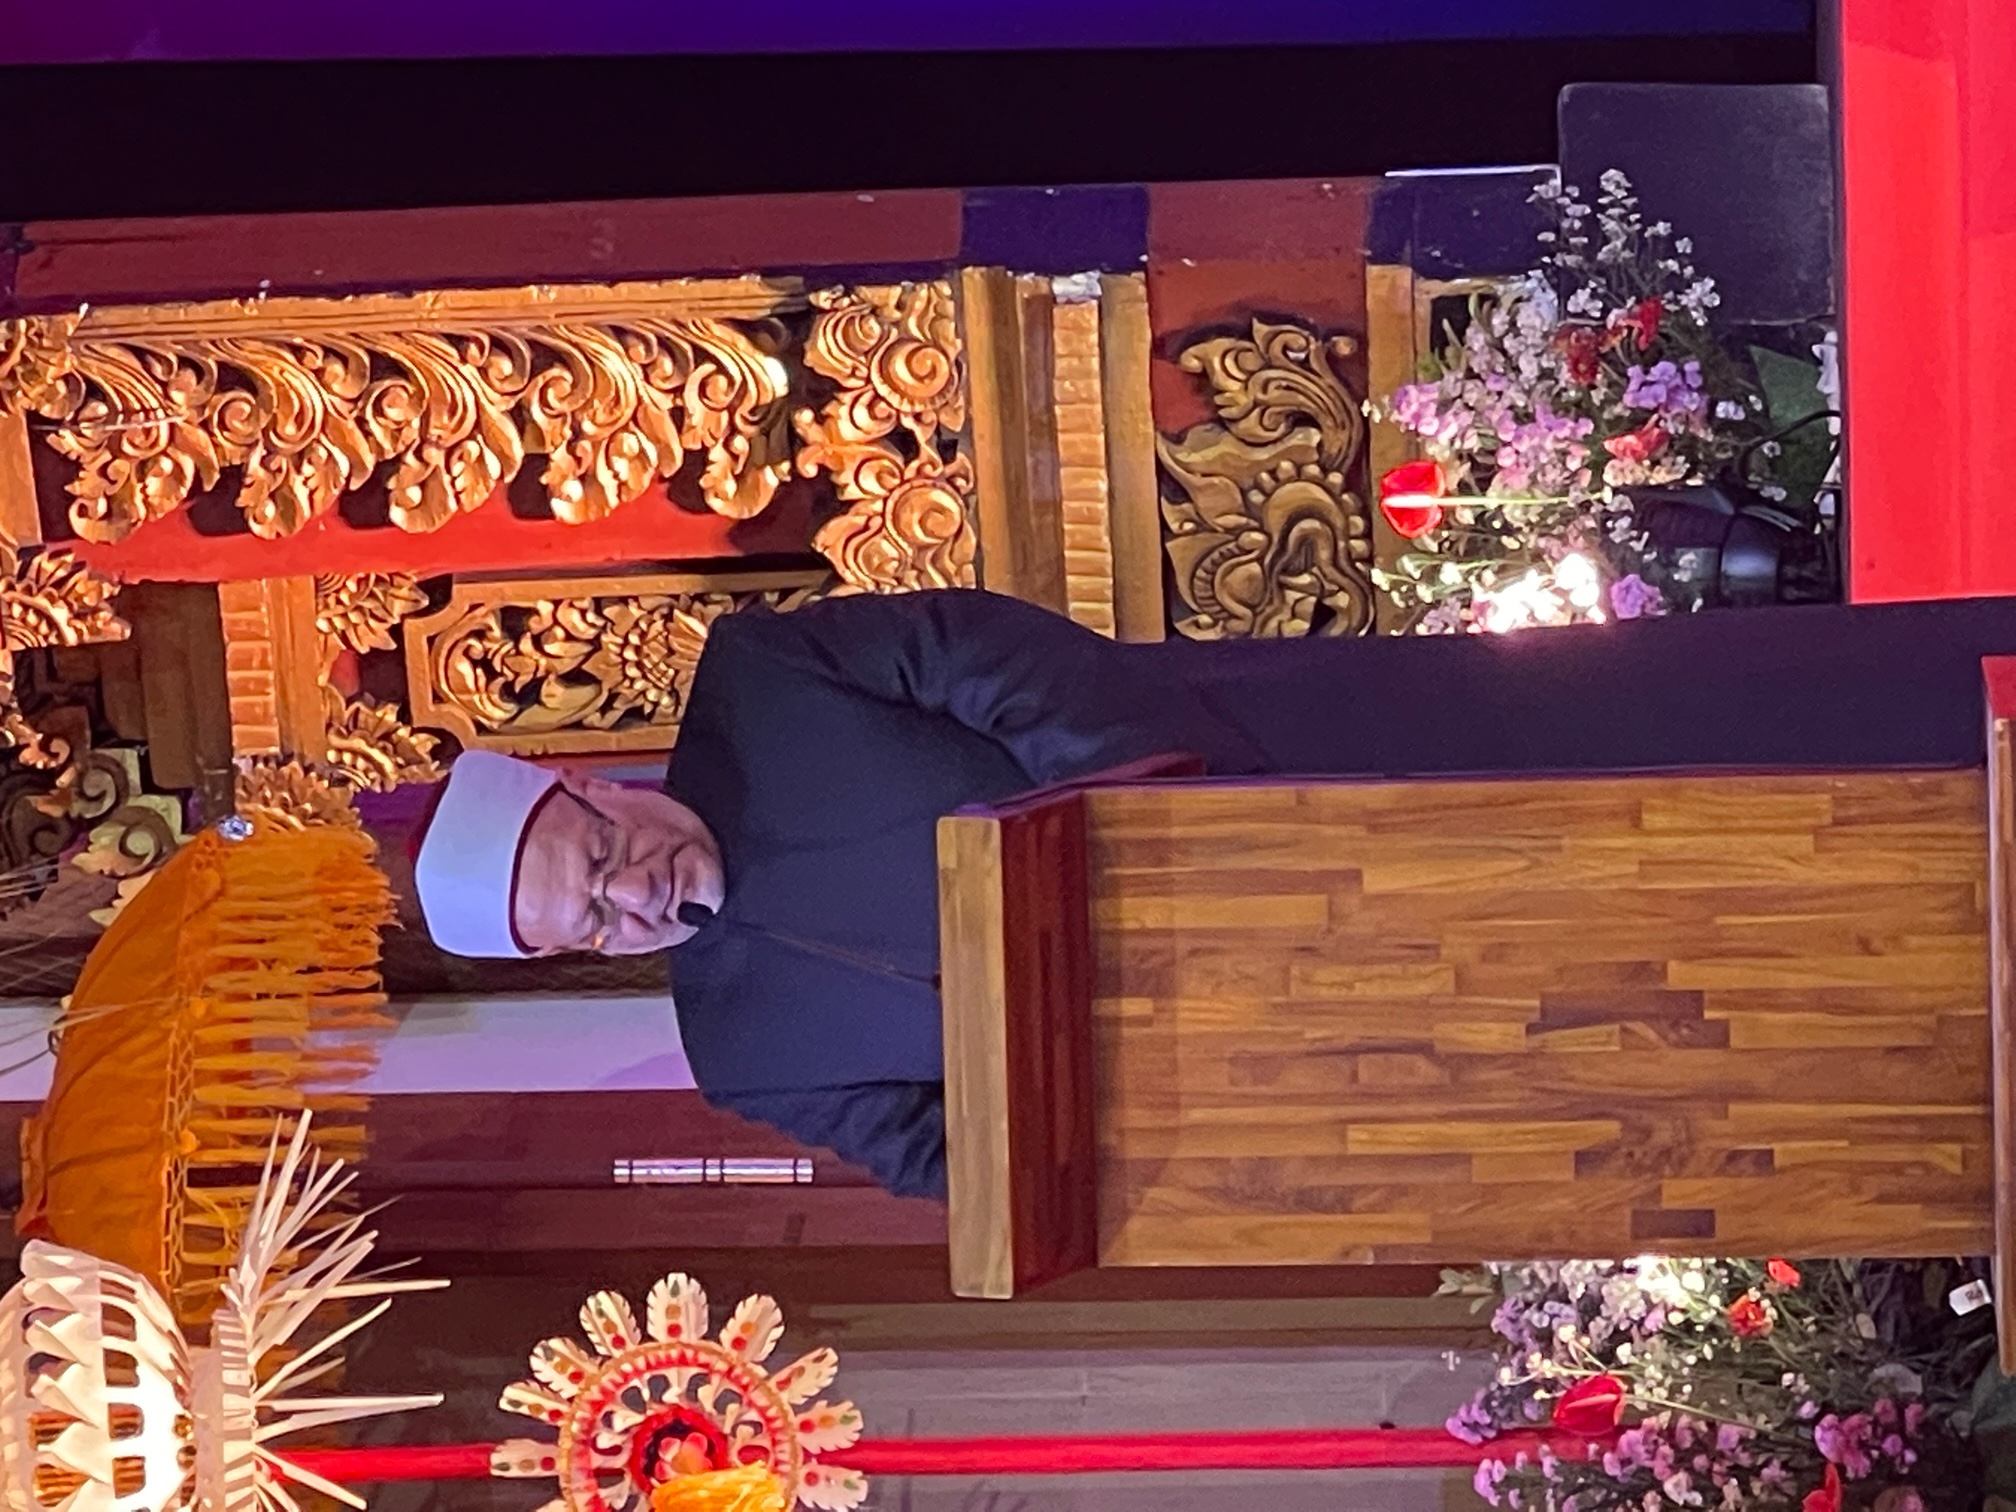 Egypt's Mufti delivers keynote speech at Indonesia's R20 Summit